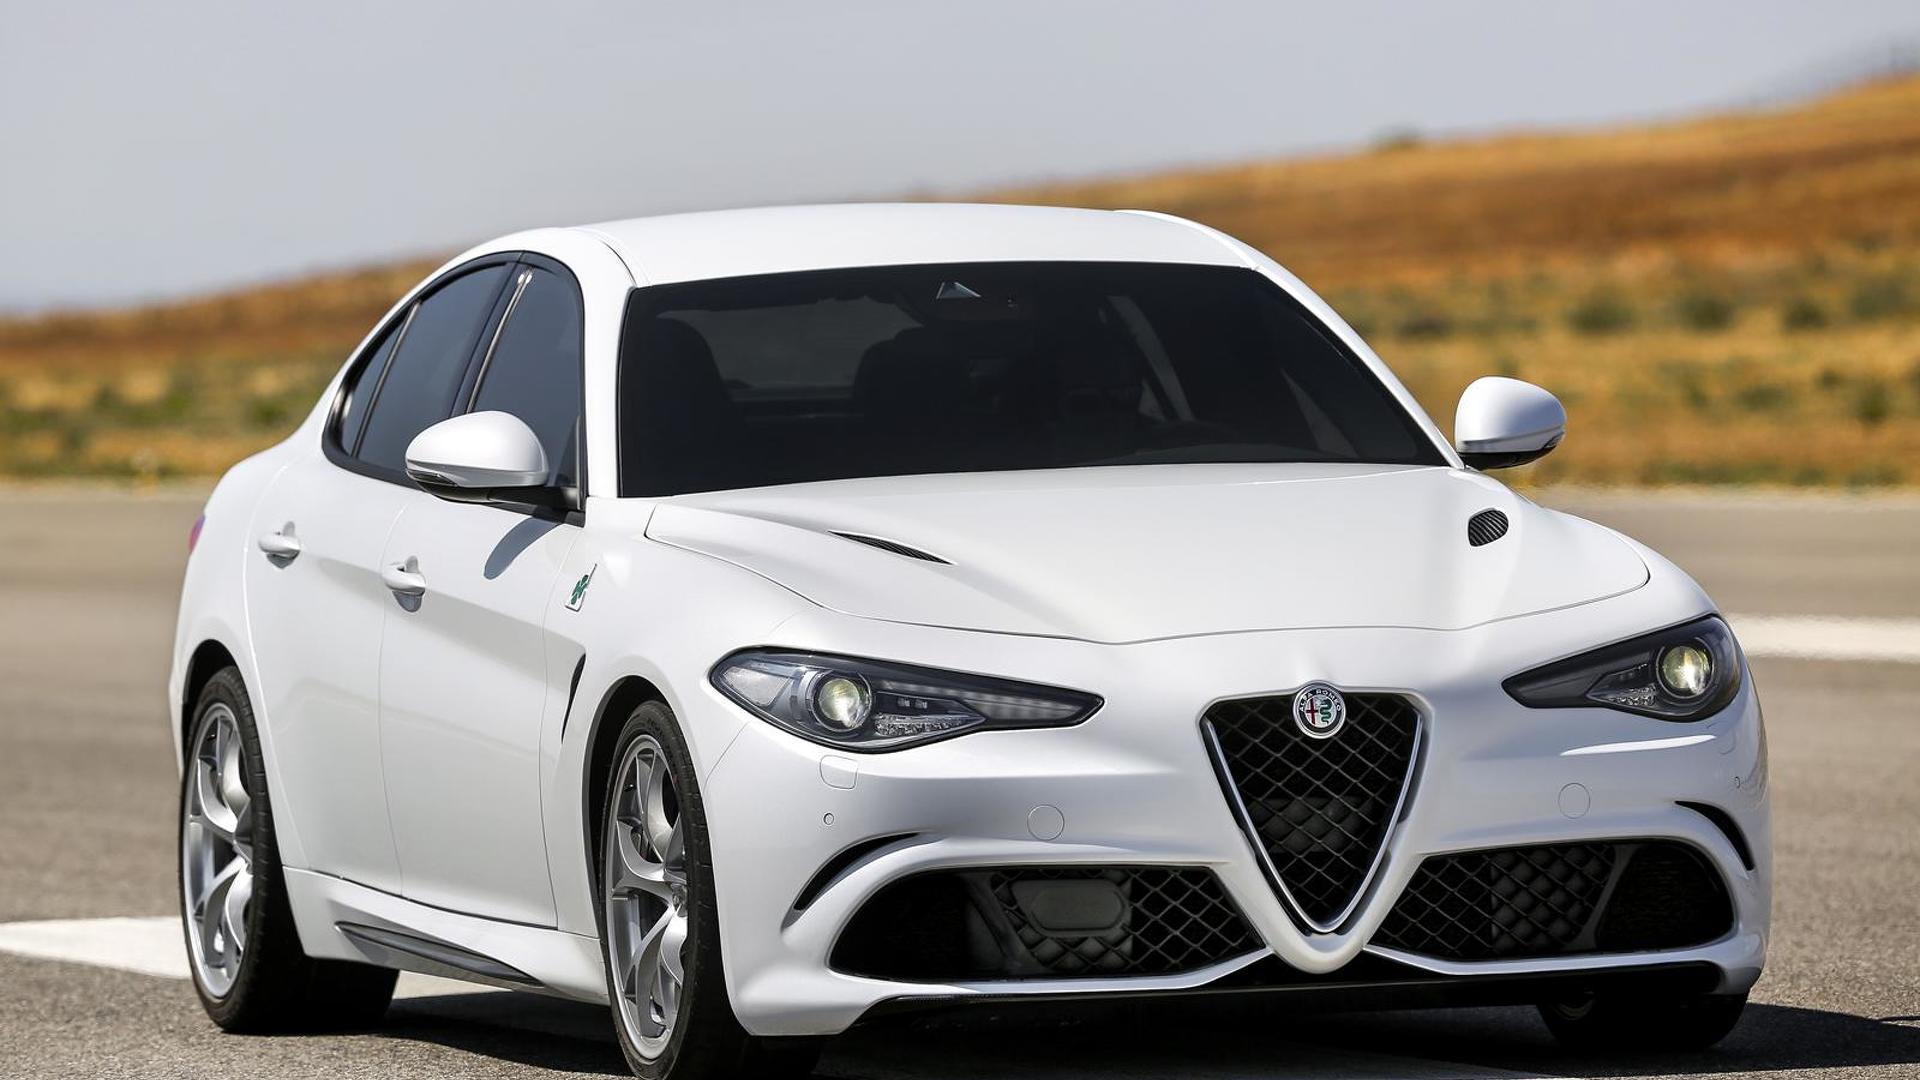 Alfa Romeo says Giulia design was inspired by the , not the